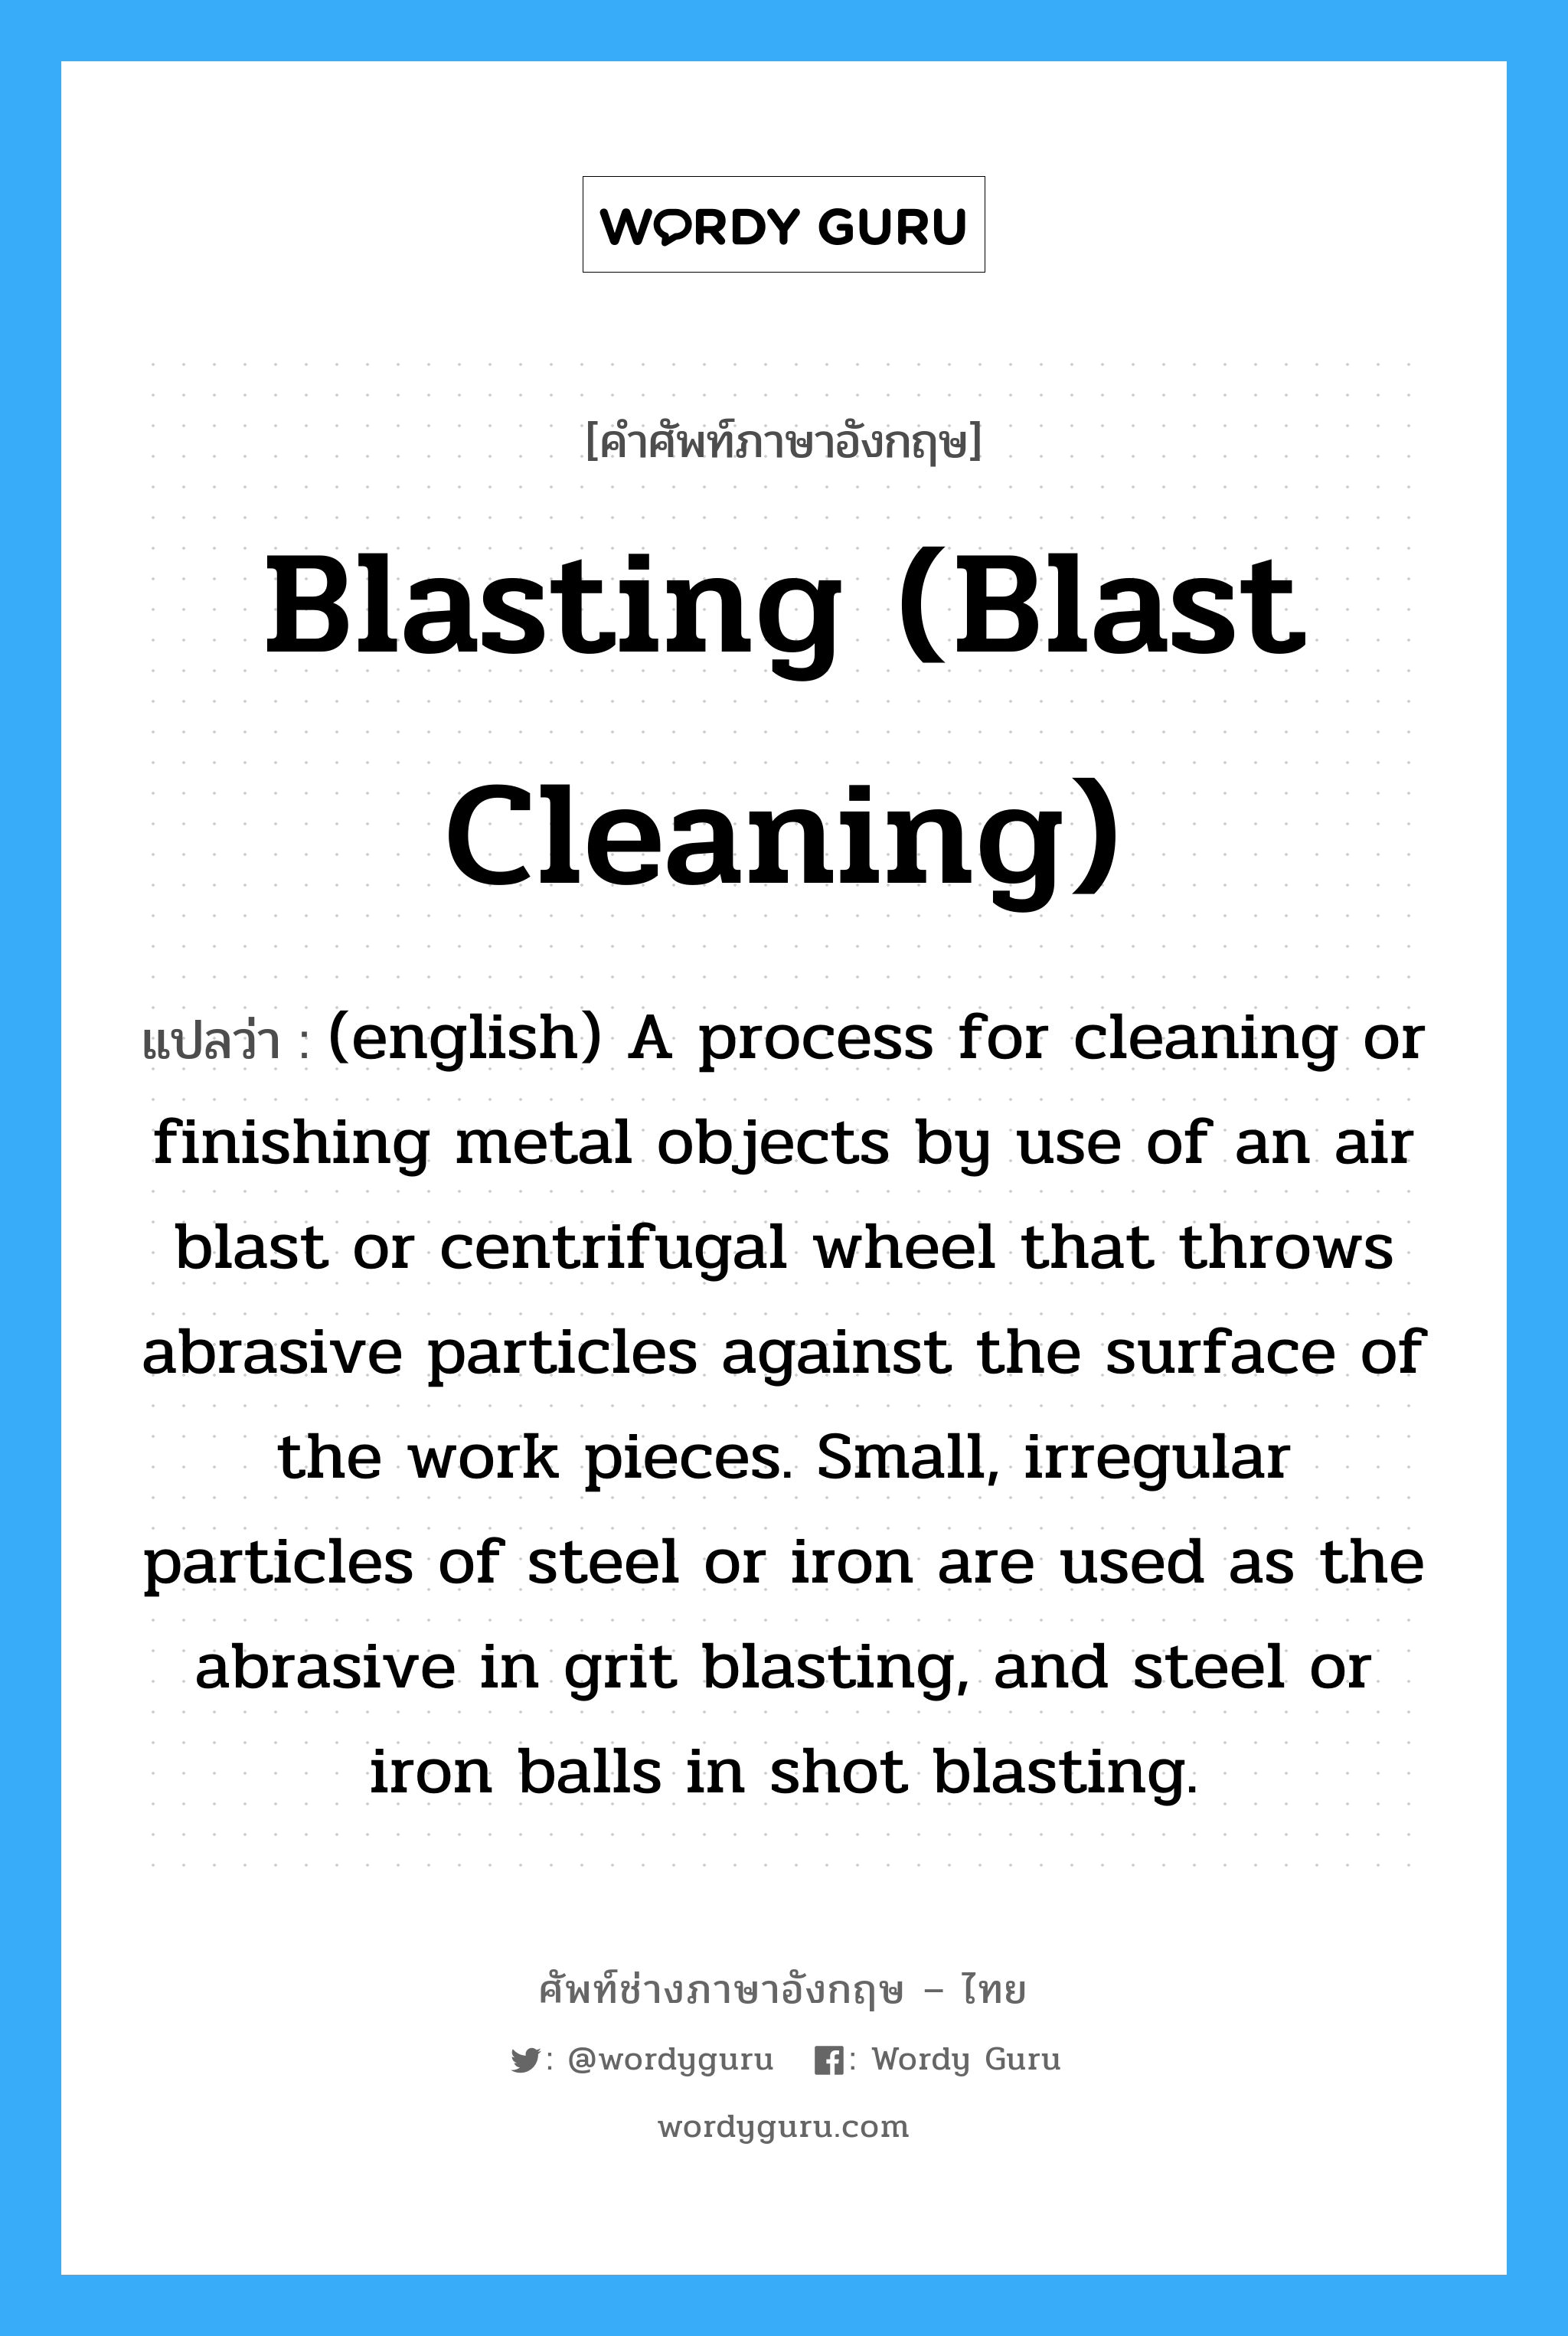 (english) A process for cleaning or finishing metal objects by use of an air blast or centrifugal wheel that throws abrasive particles against the surface of the work pieces. Small, irregular particles of steel or iron are used as the abrasive in grit blasting, and steel or iron balls in shot blasting. ภาษาอังกฤษ?, คำศัพท์ช่างภาษาอังกฤษ - ไทย (english) A process for cleaning or finishing metal objects by use of an air blast or centrifugal wheel that throws abrasive particles against the surface of the work pieces. Small, irregular particles of steel or iron are used as the abrasive in grit blasting, and steel or iron balls in shot blasting. คำศัพท์ภาษาอังกฤษ (english) A process for cleaning or finishing metal objects by use of an air blast or centrifugal wheel that throws abrasive particles against the surface of the work pieces. Small, irregular particles of steel or iron are used as the abrasive in grit blasting, and steel or iron balls in shot blasting. แปลว่า Blasting (Blast Cleaning)